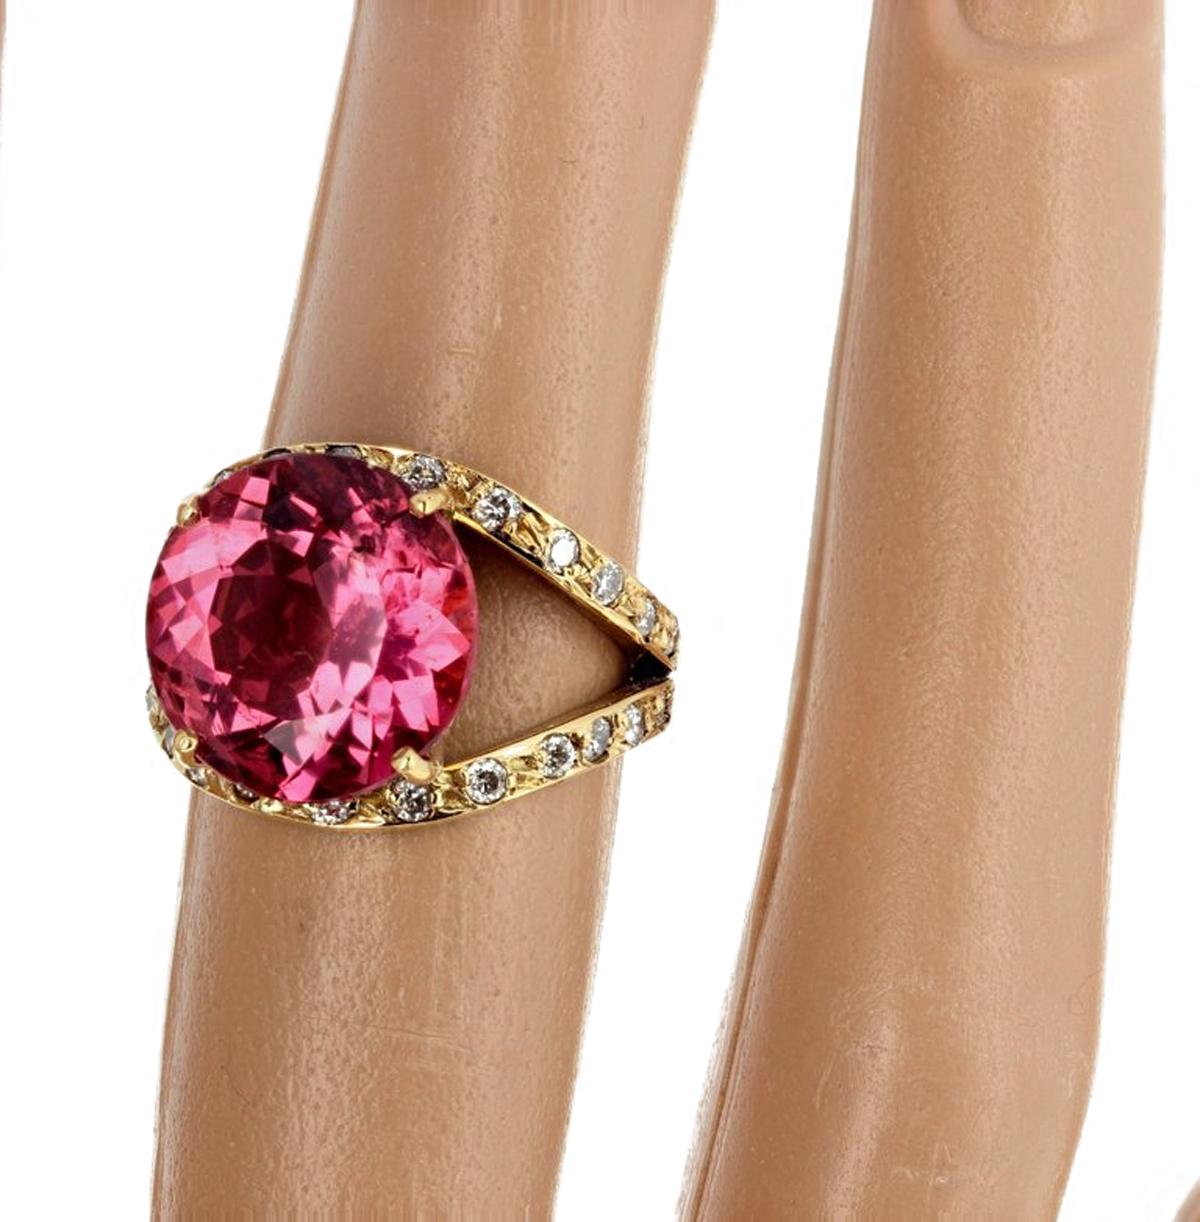 Unique Brilliant glittering natural pink 12.7 mm round Tourmaline (8.36 carats) enhanced with approximately one carat of sparkling white diamonds set in a handmade 18Kt yellow gold ring size 6 (sizable for free).  There are NO eye visible inclusions